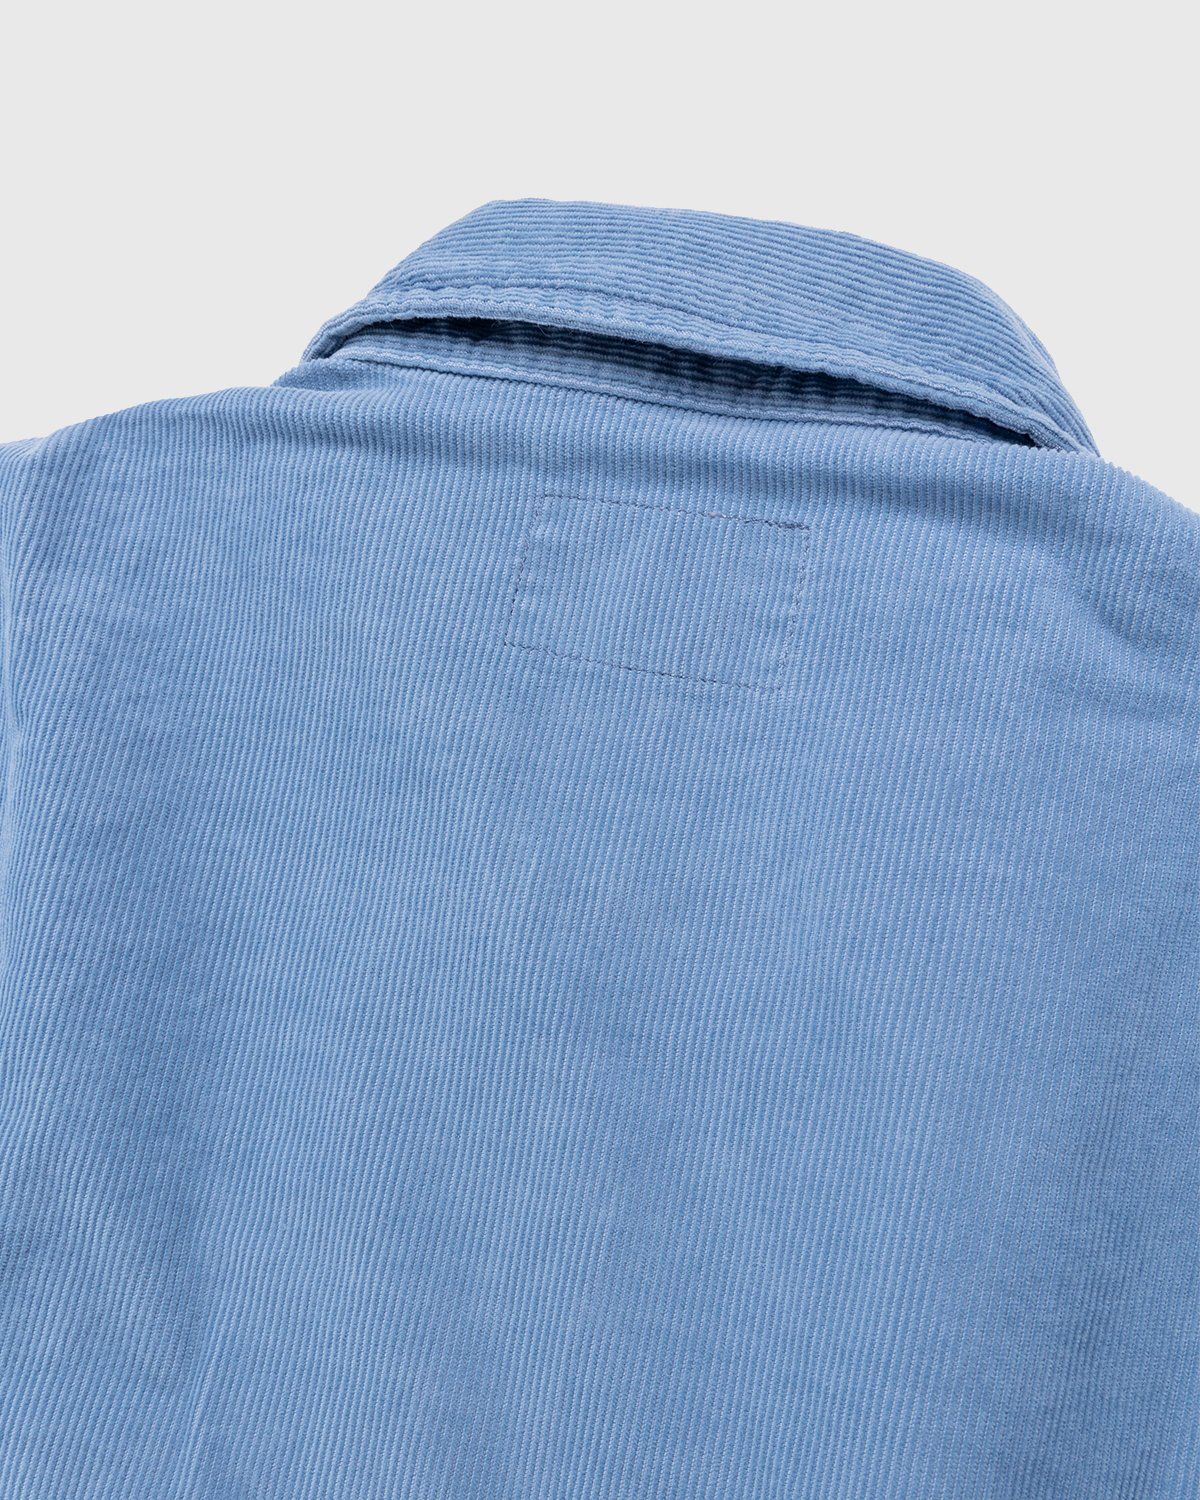 Carhartt WIP – Dixon Shirt Jacket Icy Water Rinsed - Outerwear - Blue - Image 5